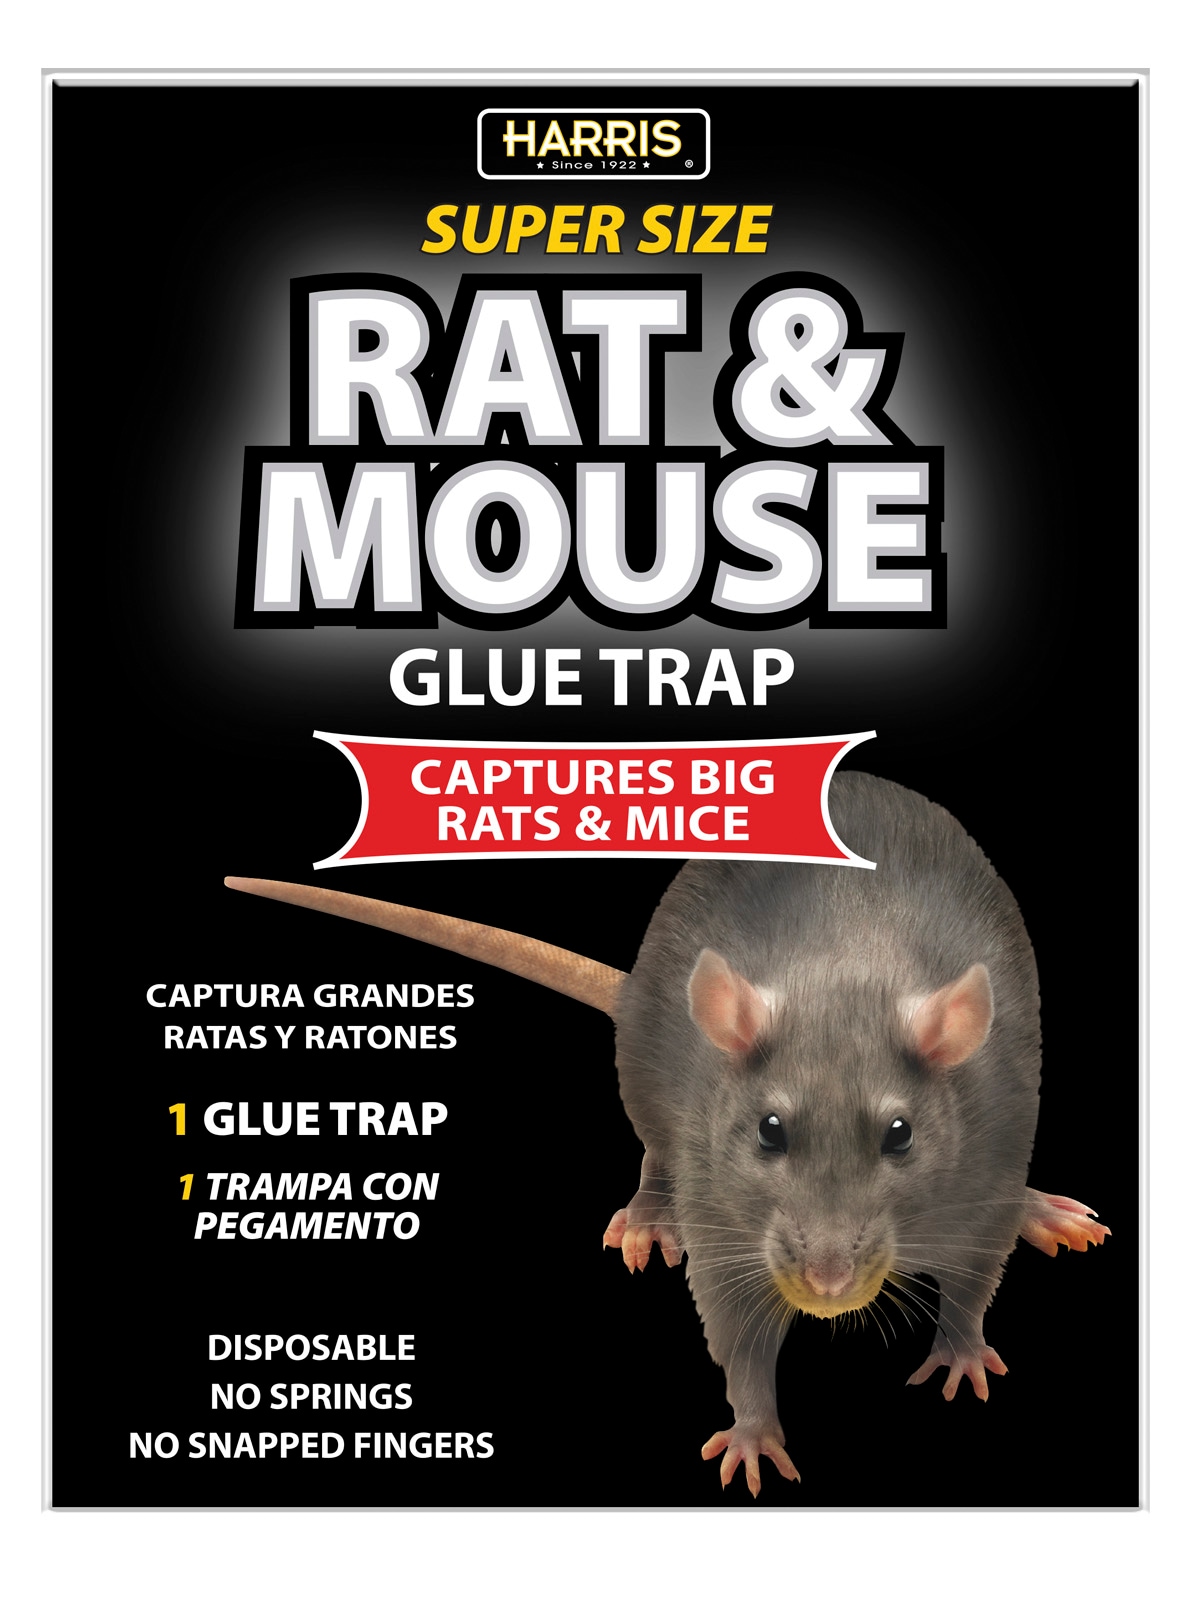 Harris Rat and Mouse Glue Trap Mouse Traps at